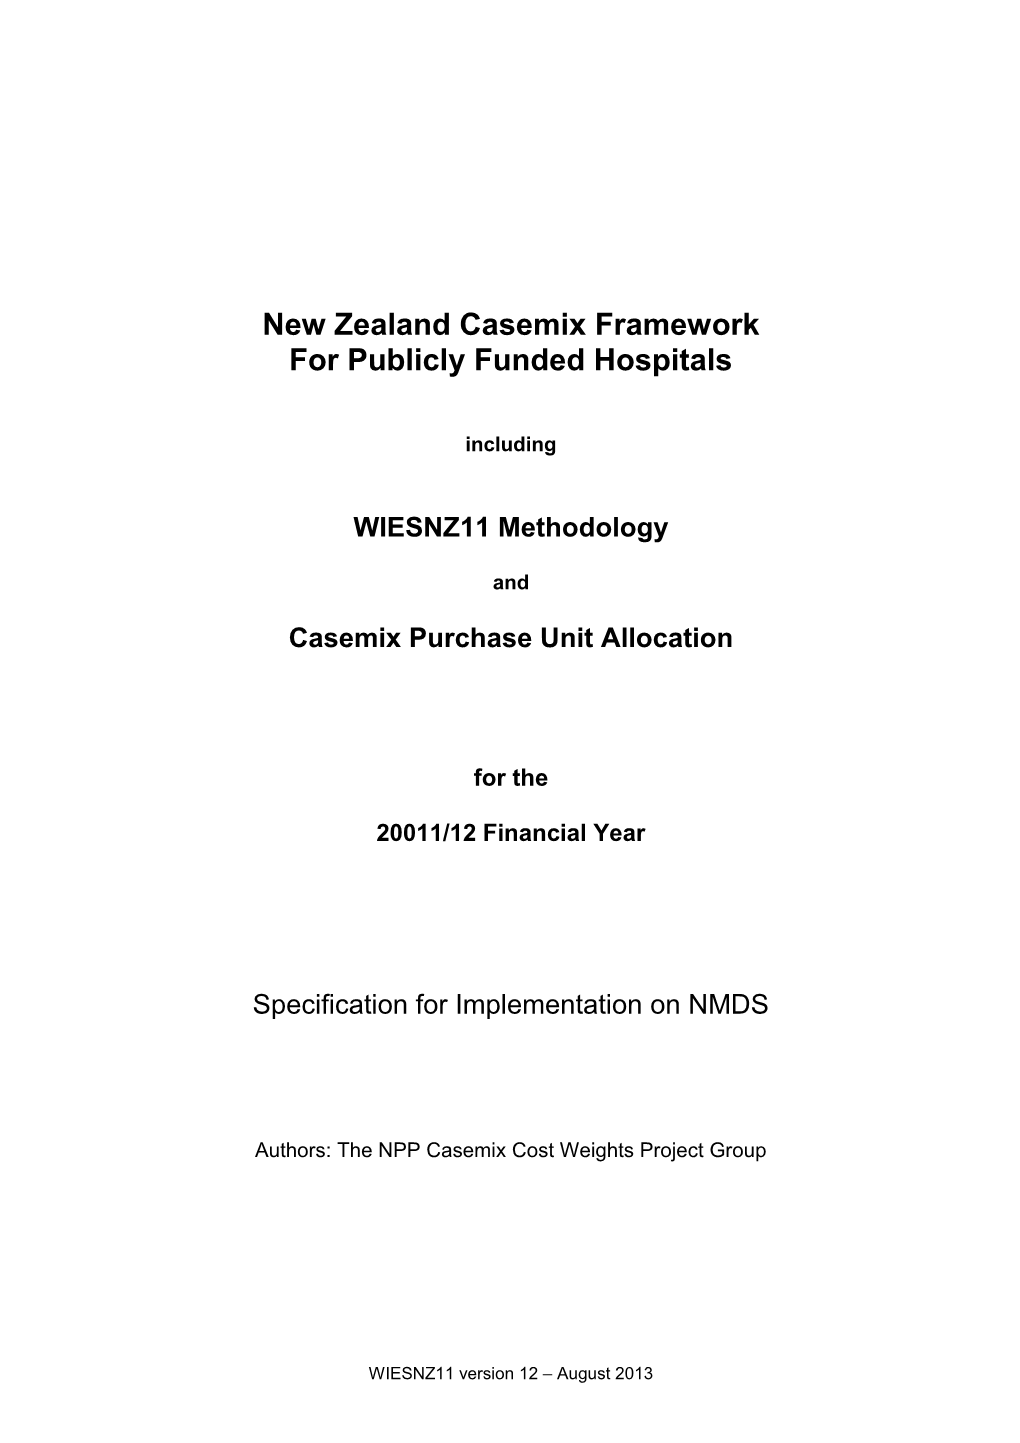 New Zealand Casemix Framework for Publicly Funded Hospitals WIESNZ11 2011/12